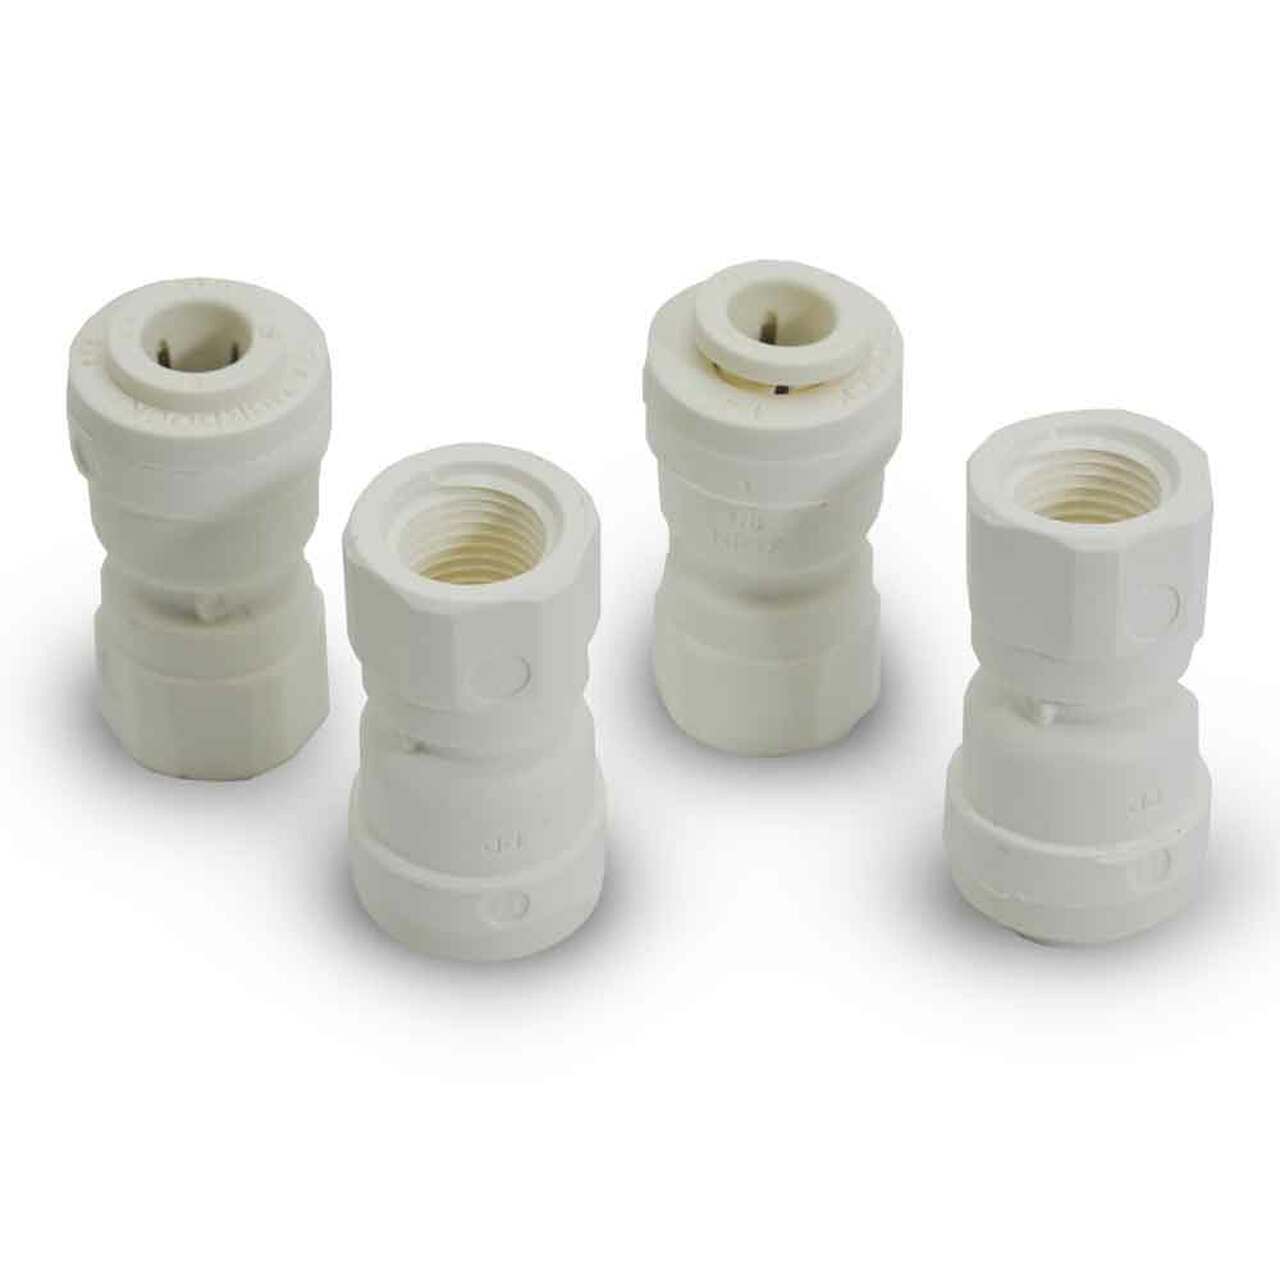 4 PACK - 1/4" x 1/8" nptf Female Adapter WHITE (Apex DOS Fitting)